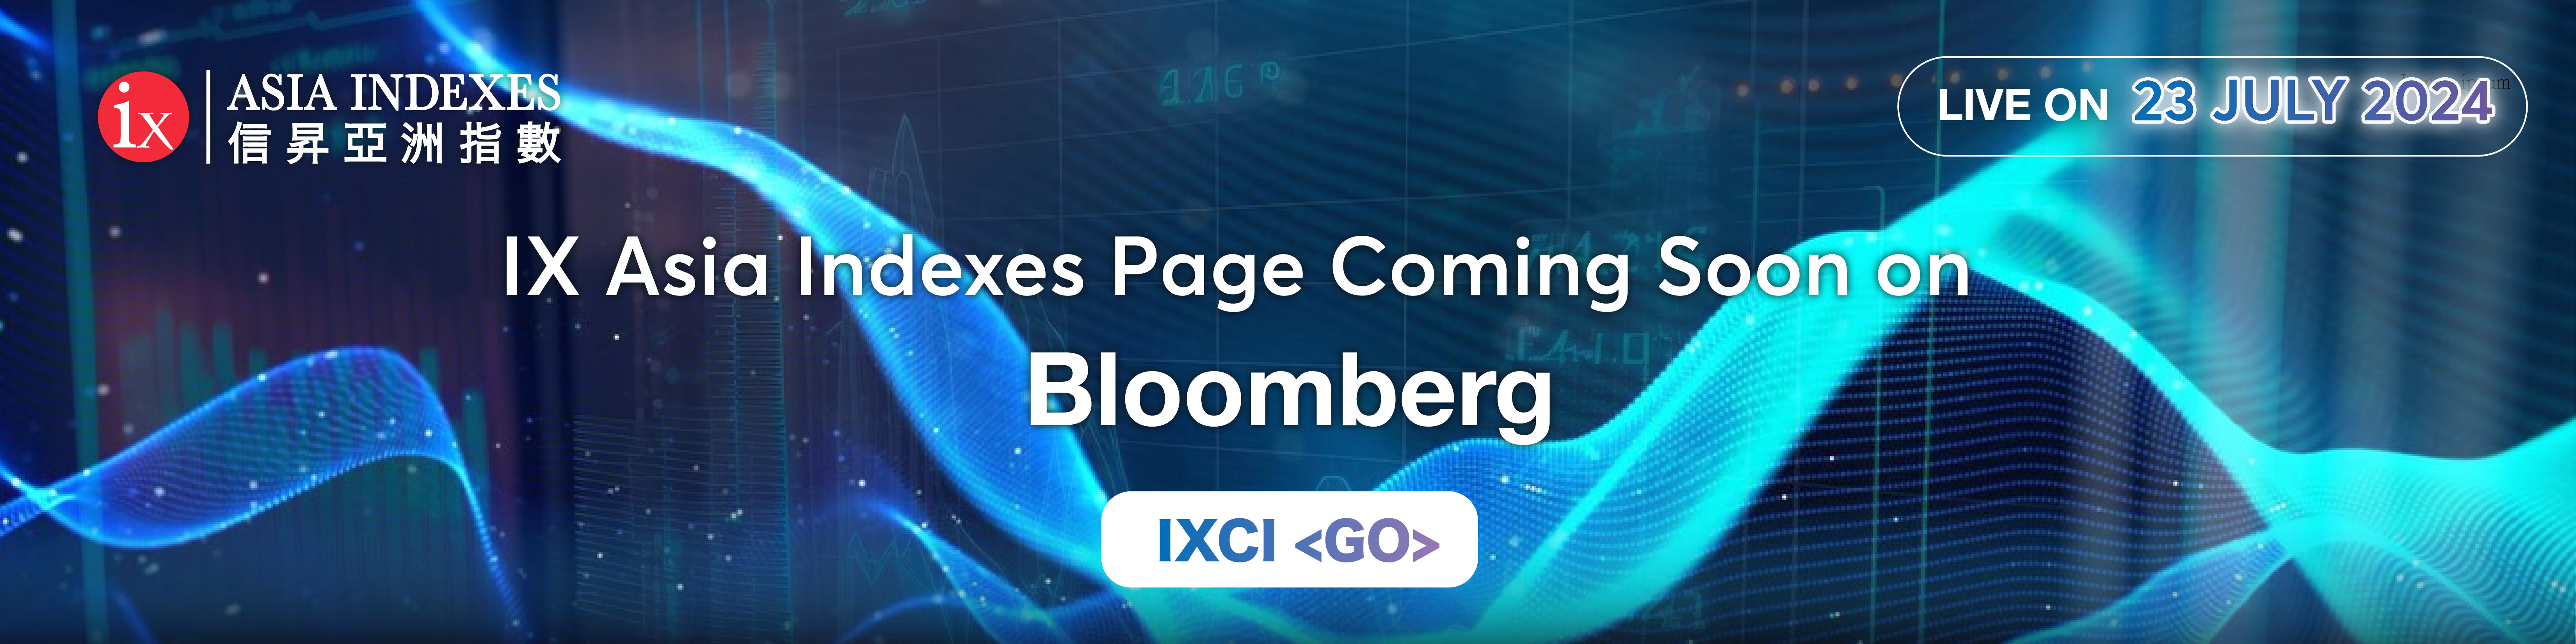 10 IX Asia Indexes Page Coming Soon on Bloomberg